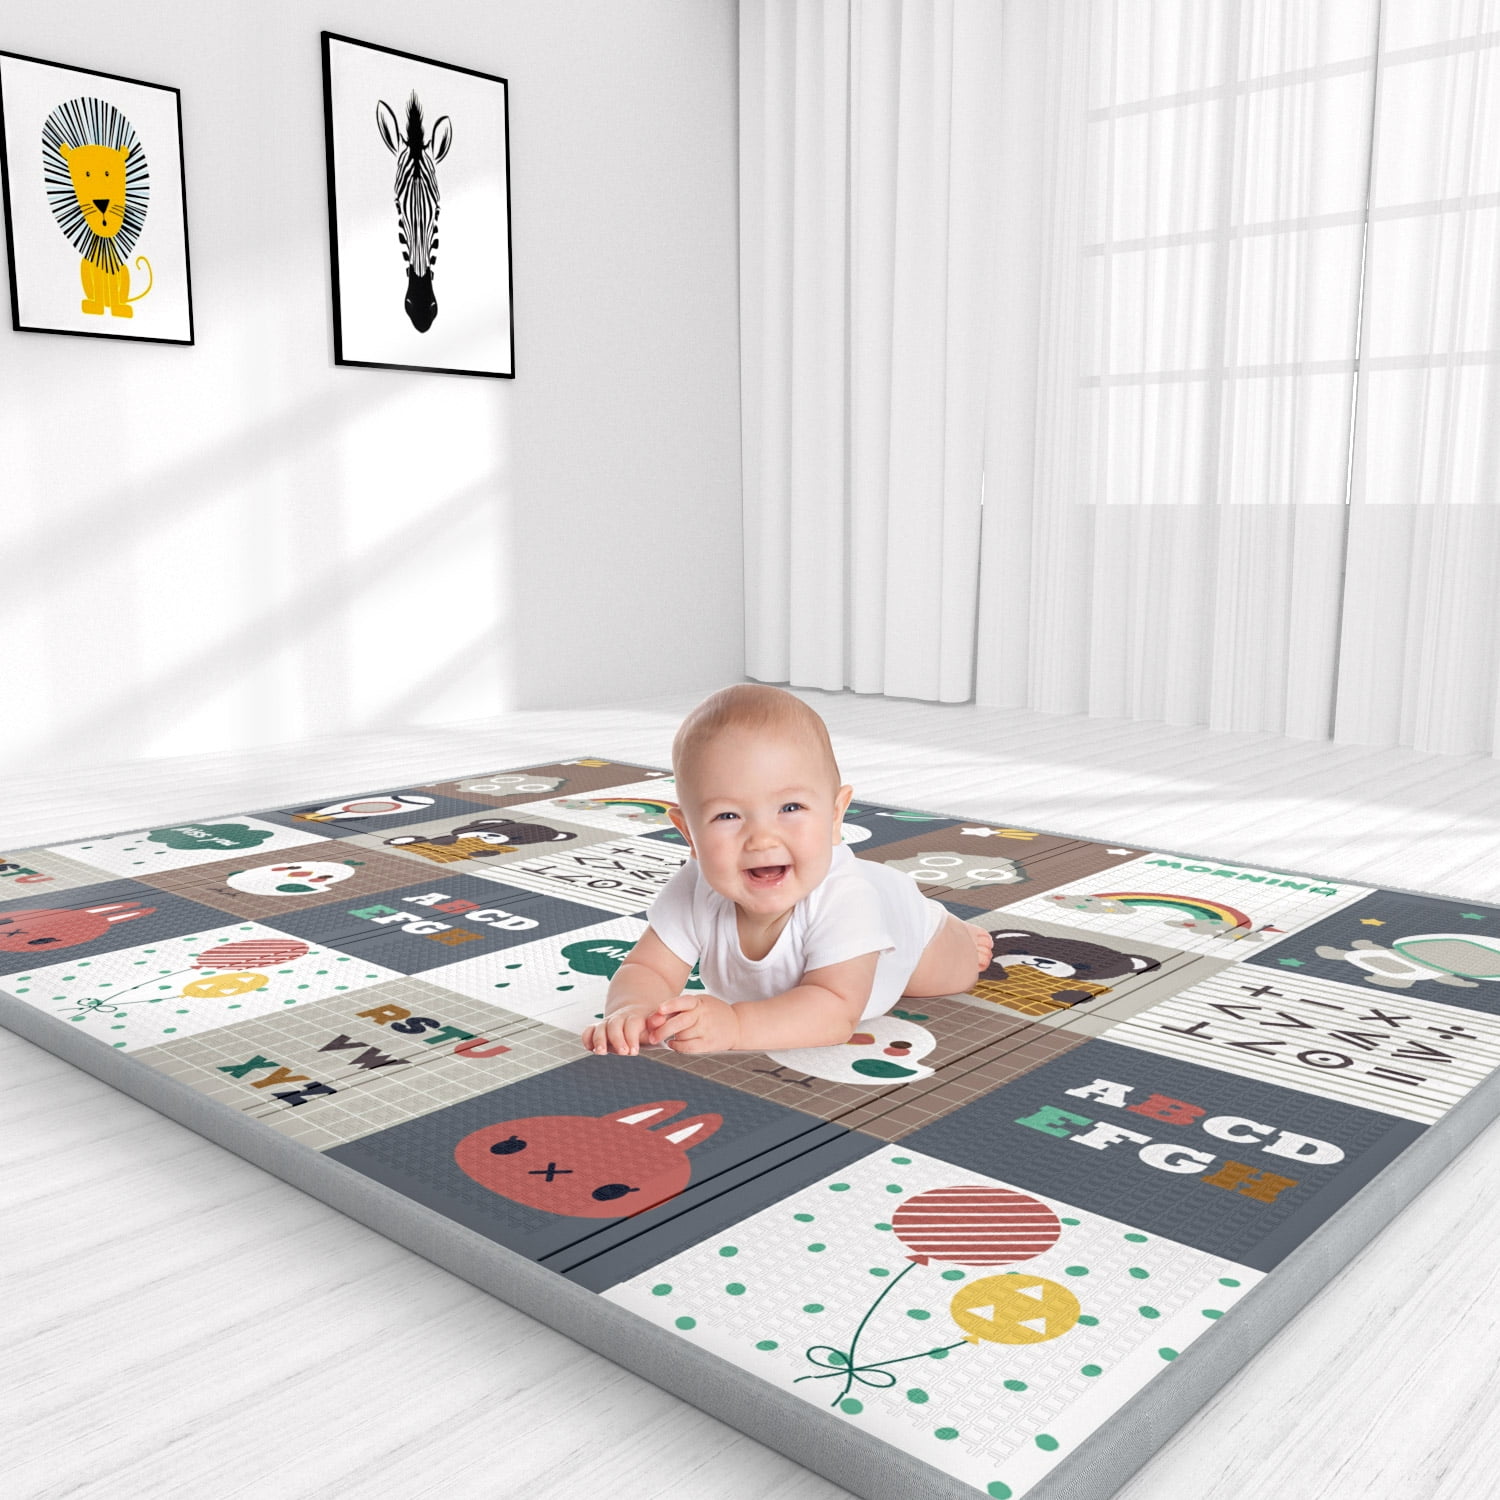 ADHINO Certified Non-Toxic & Skin-Friendly - 79"x71" Foldable Foam Baby Play Mat for Floor, Waterproof Crawling Playmat, Anti-Slip Infant to Toddler Play Mats, Safe Kids Mat for Play & Learning - image 1 of 11